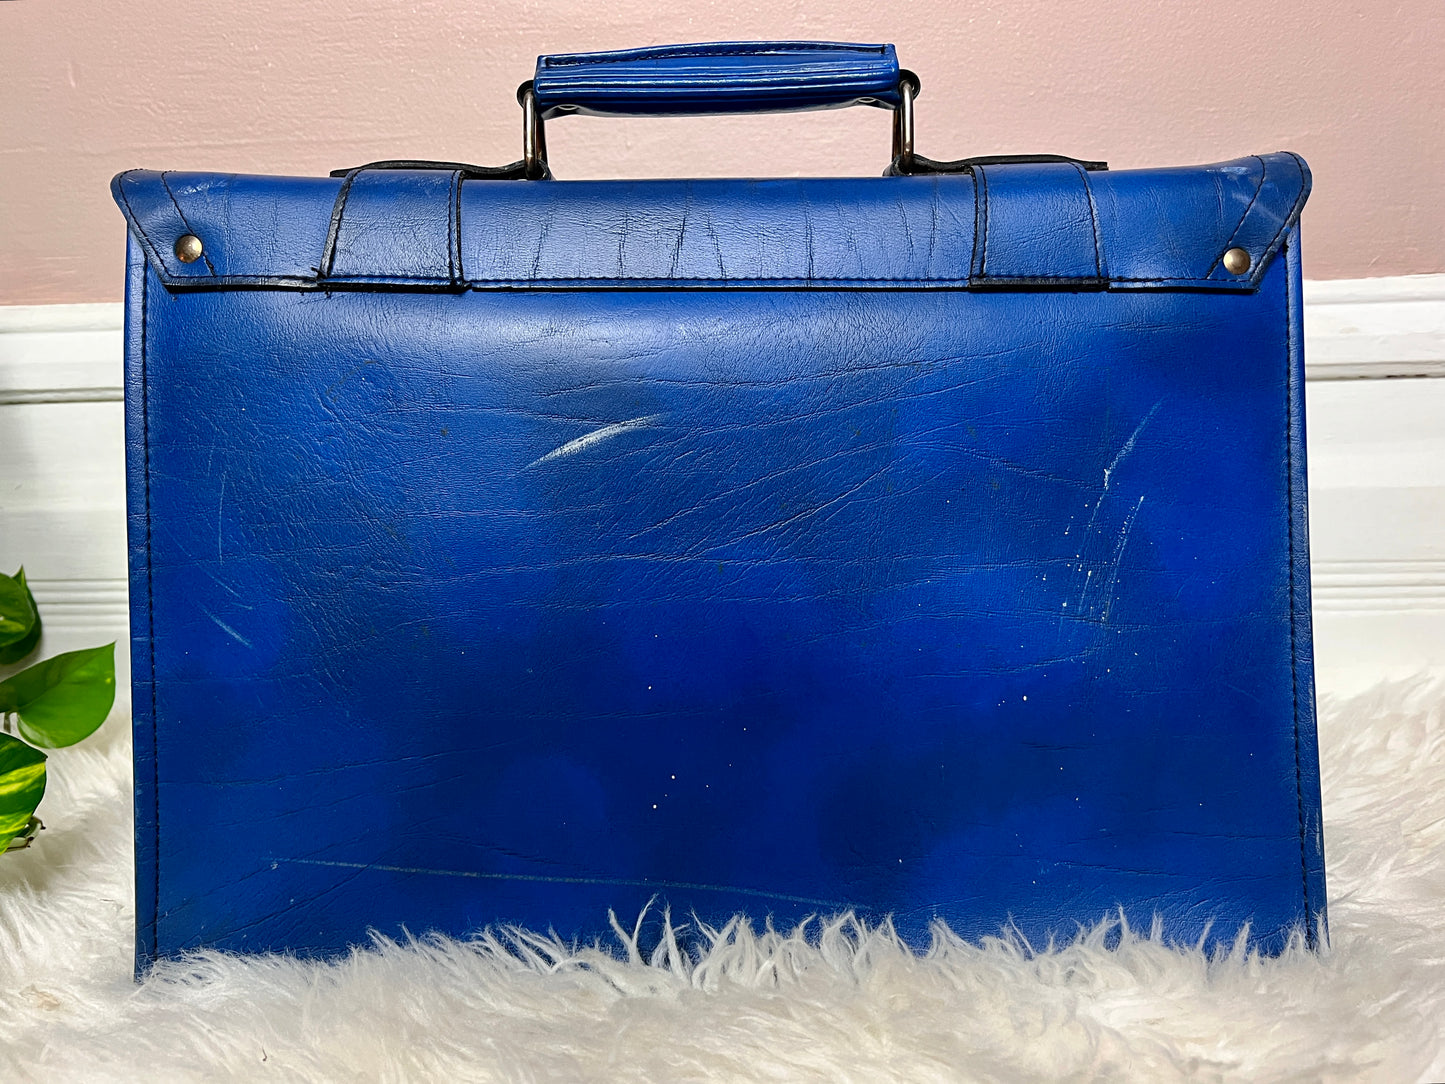 The Blue Leather Attaché